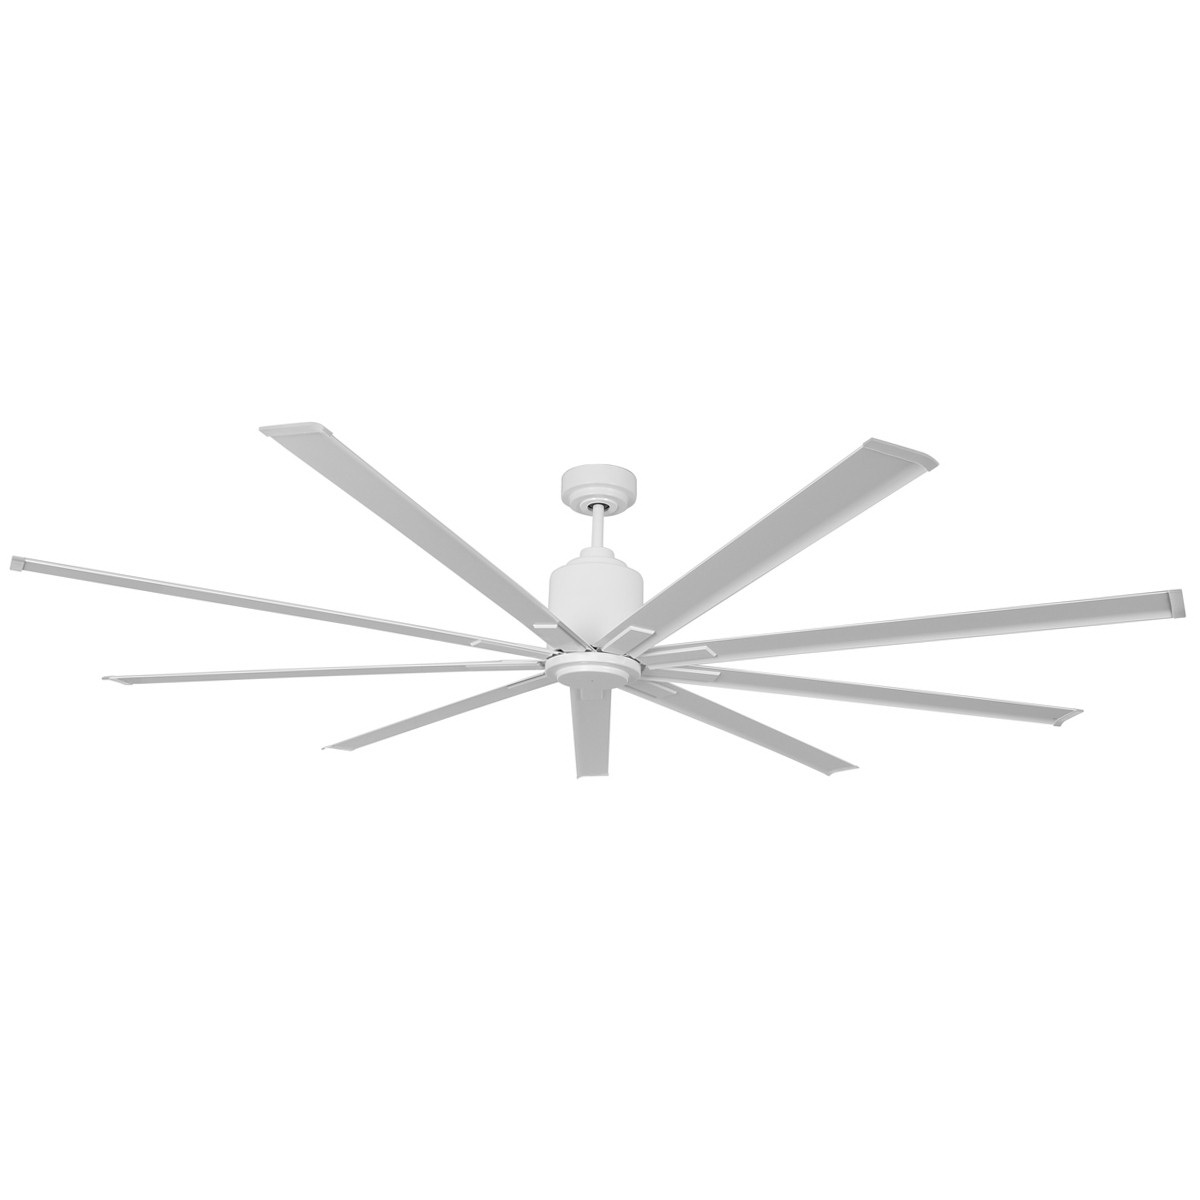 ICF96WLWH Ceiling Fan, 110 V, 6-Speed, 13,000 cfm Air, White